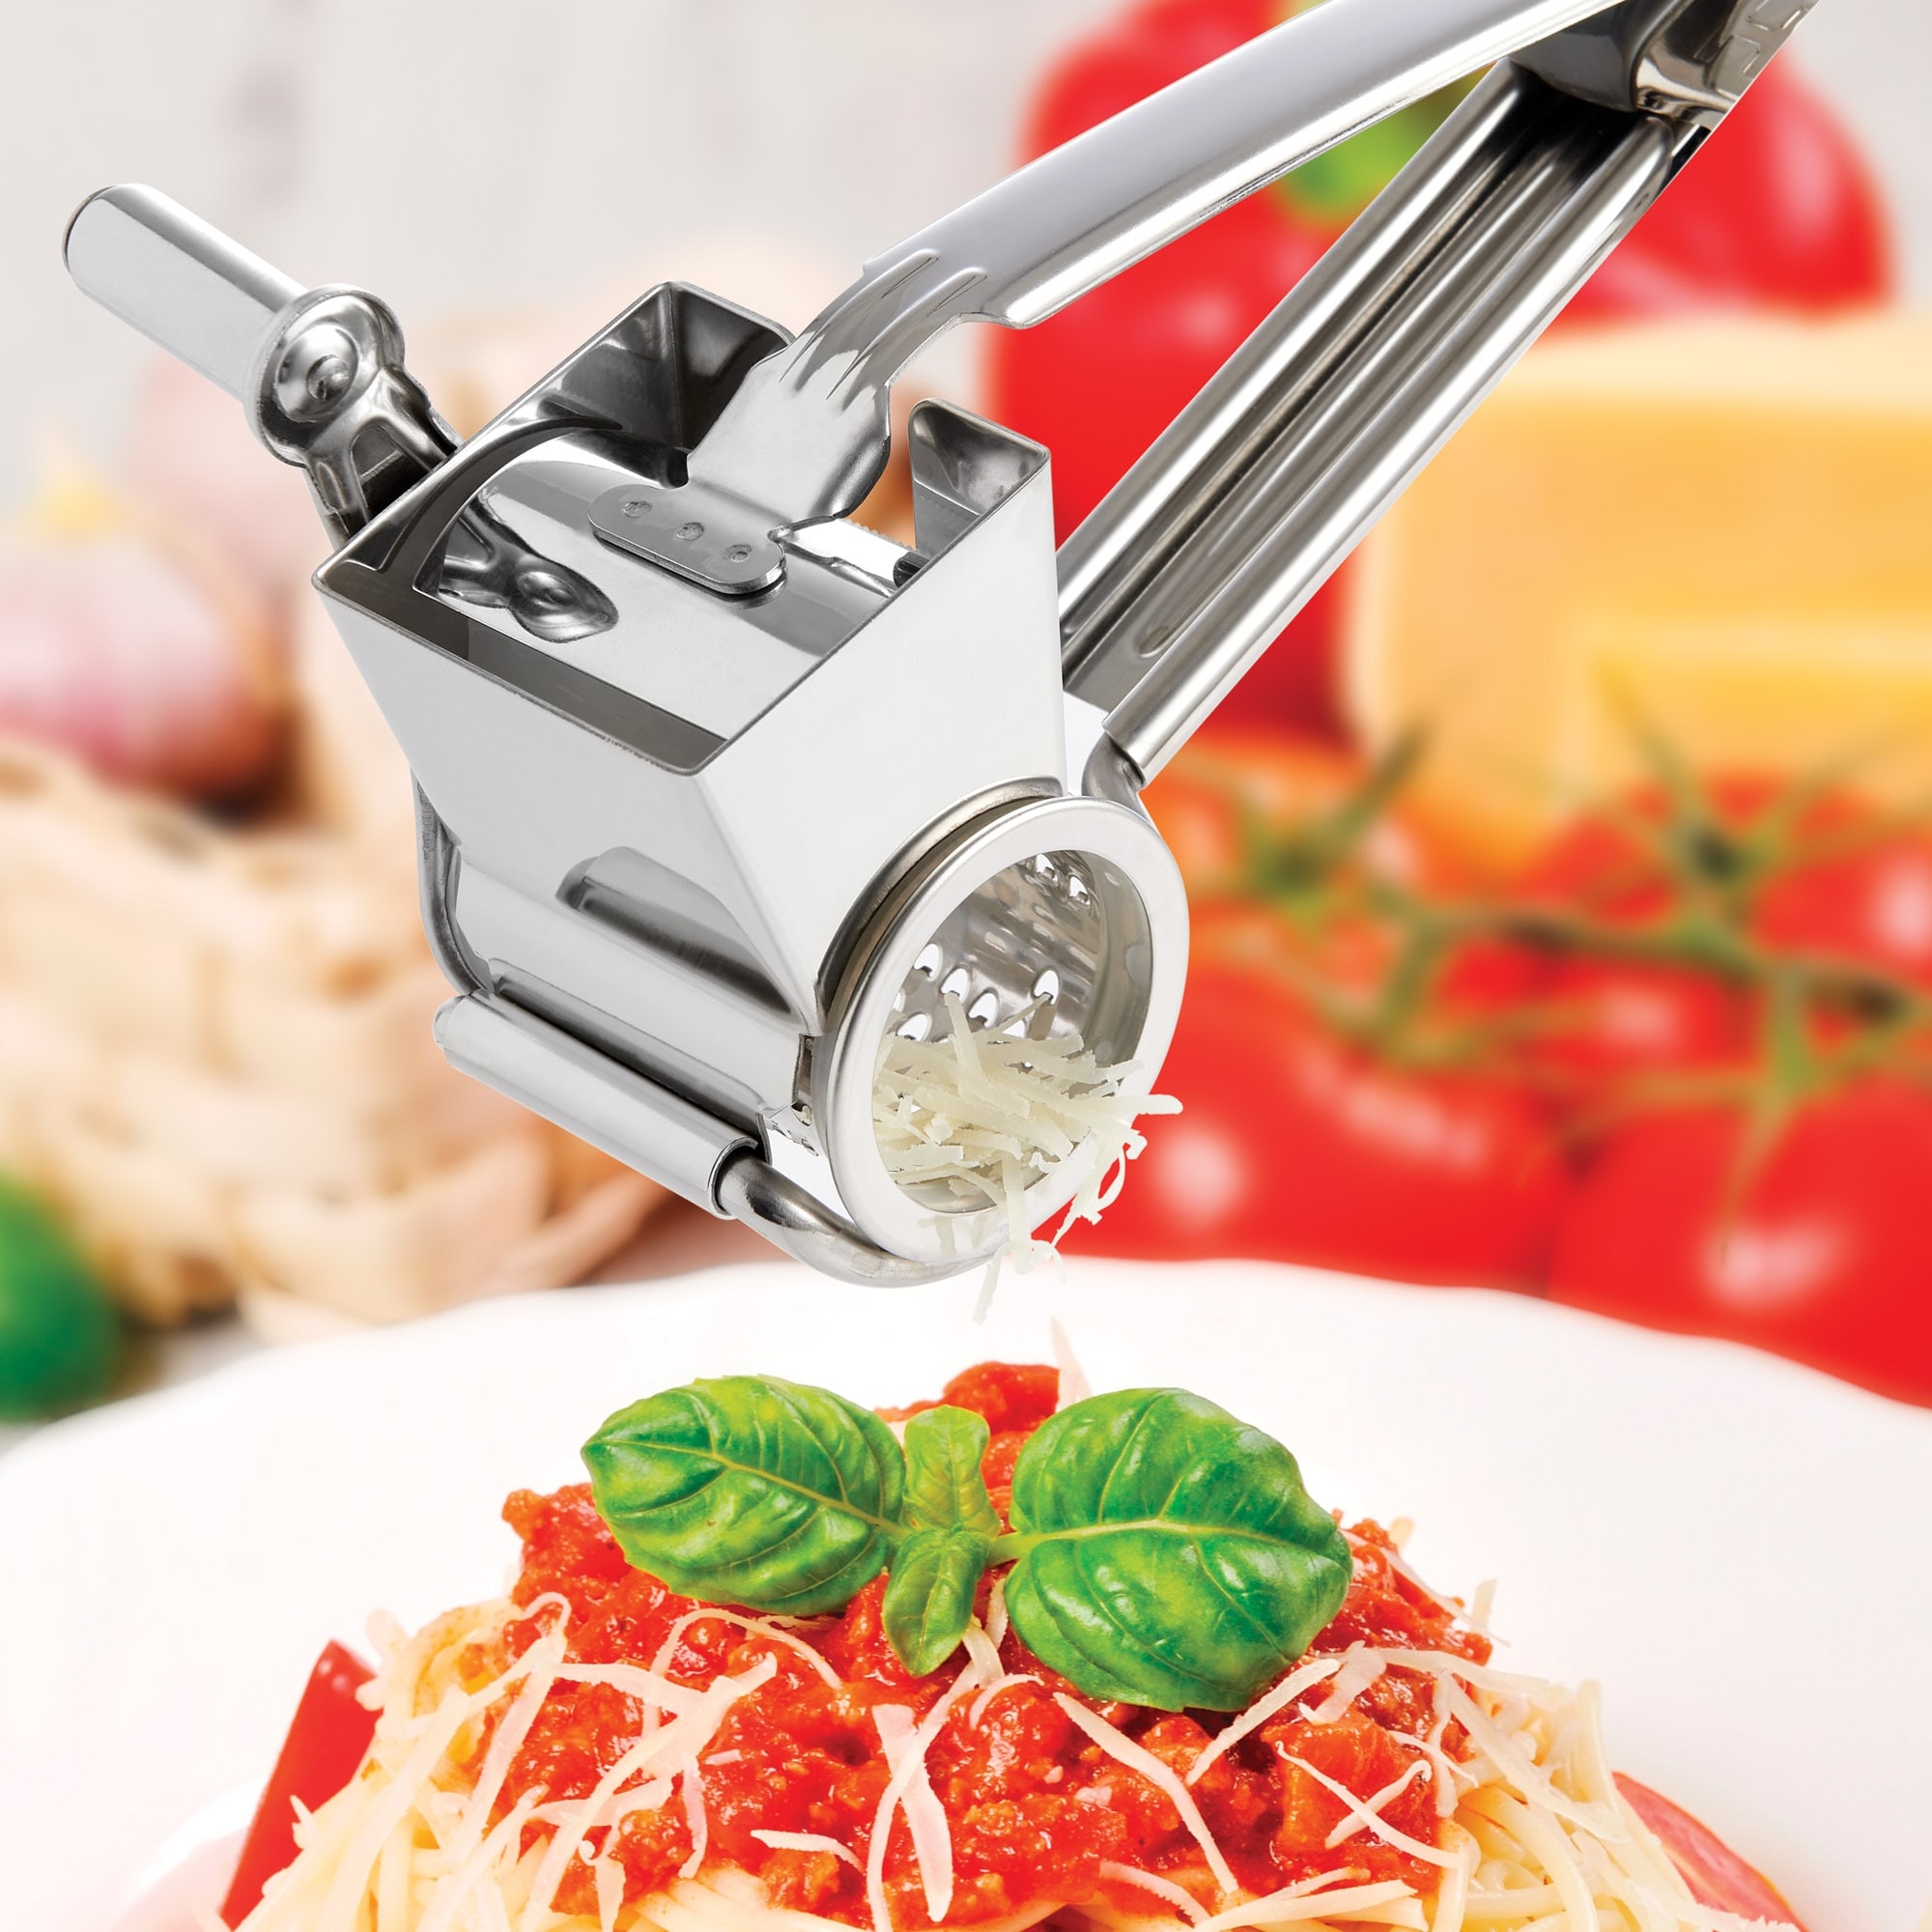 https://ak1.ostkcdn.com/images/products/is/images/direct/4b21188e6f11d3045309434051952e0f46975be2/Fantes-Deluxe-Rotary-Cheese-Grater.jpg